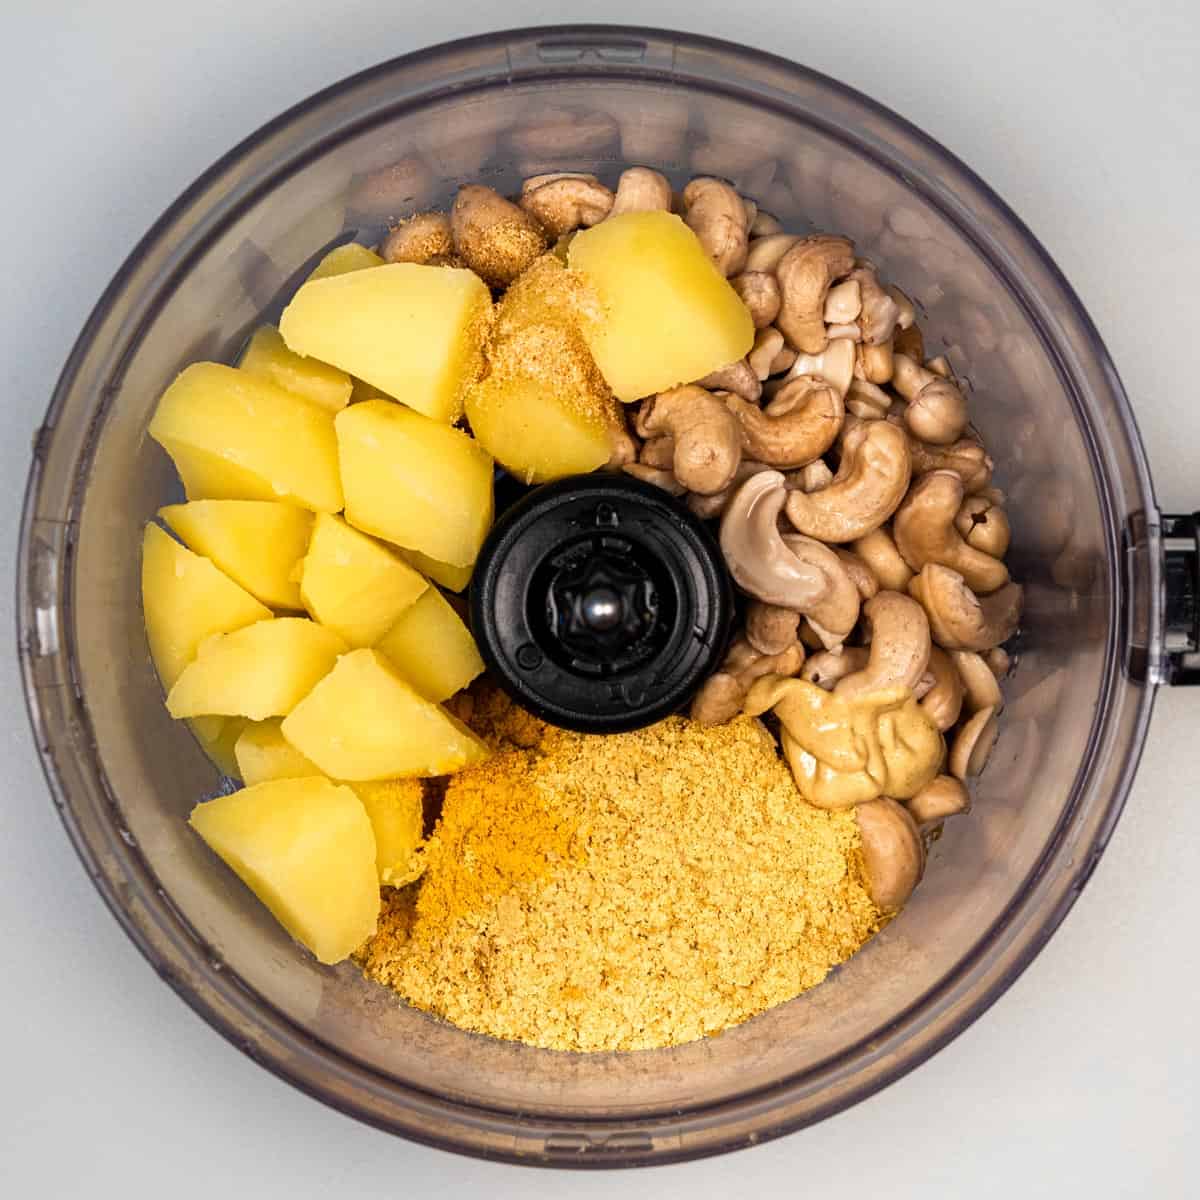 Cashews, potatoes, nutritional yeast, and garlic in a food processor.